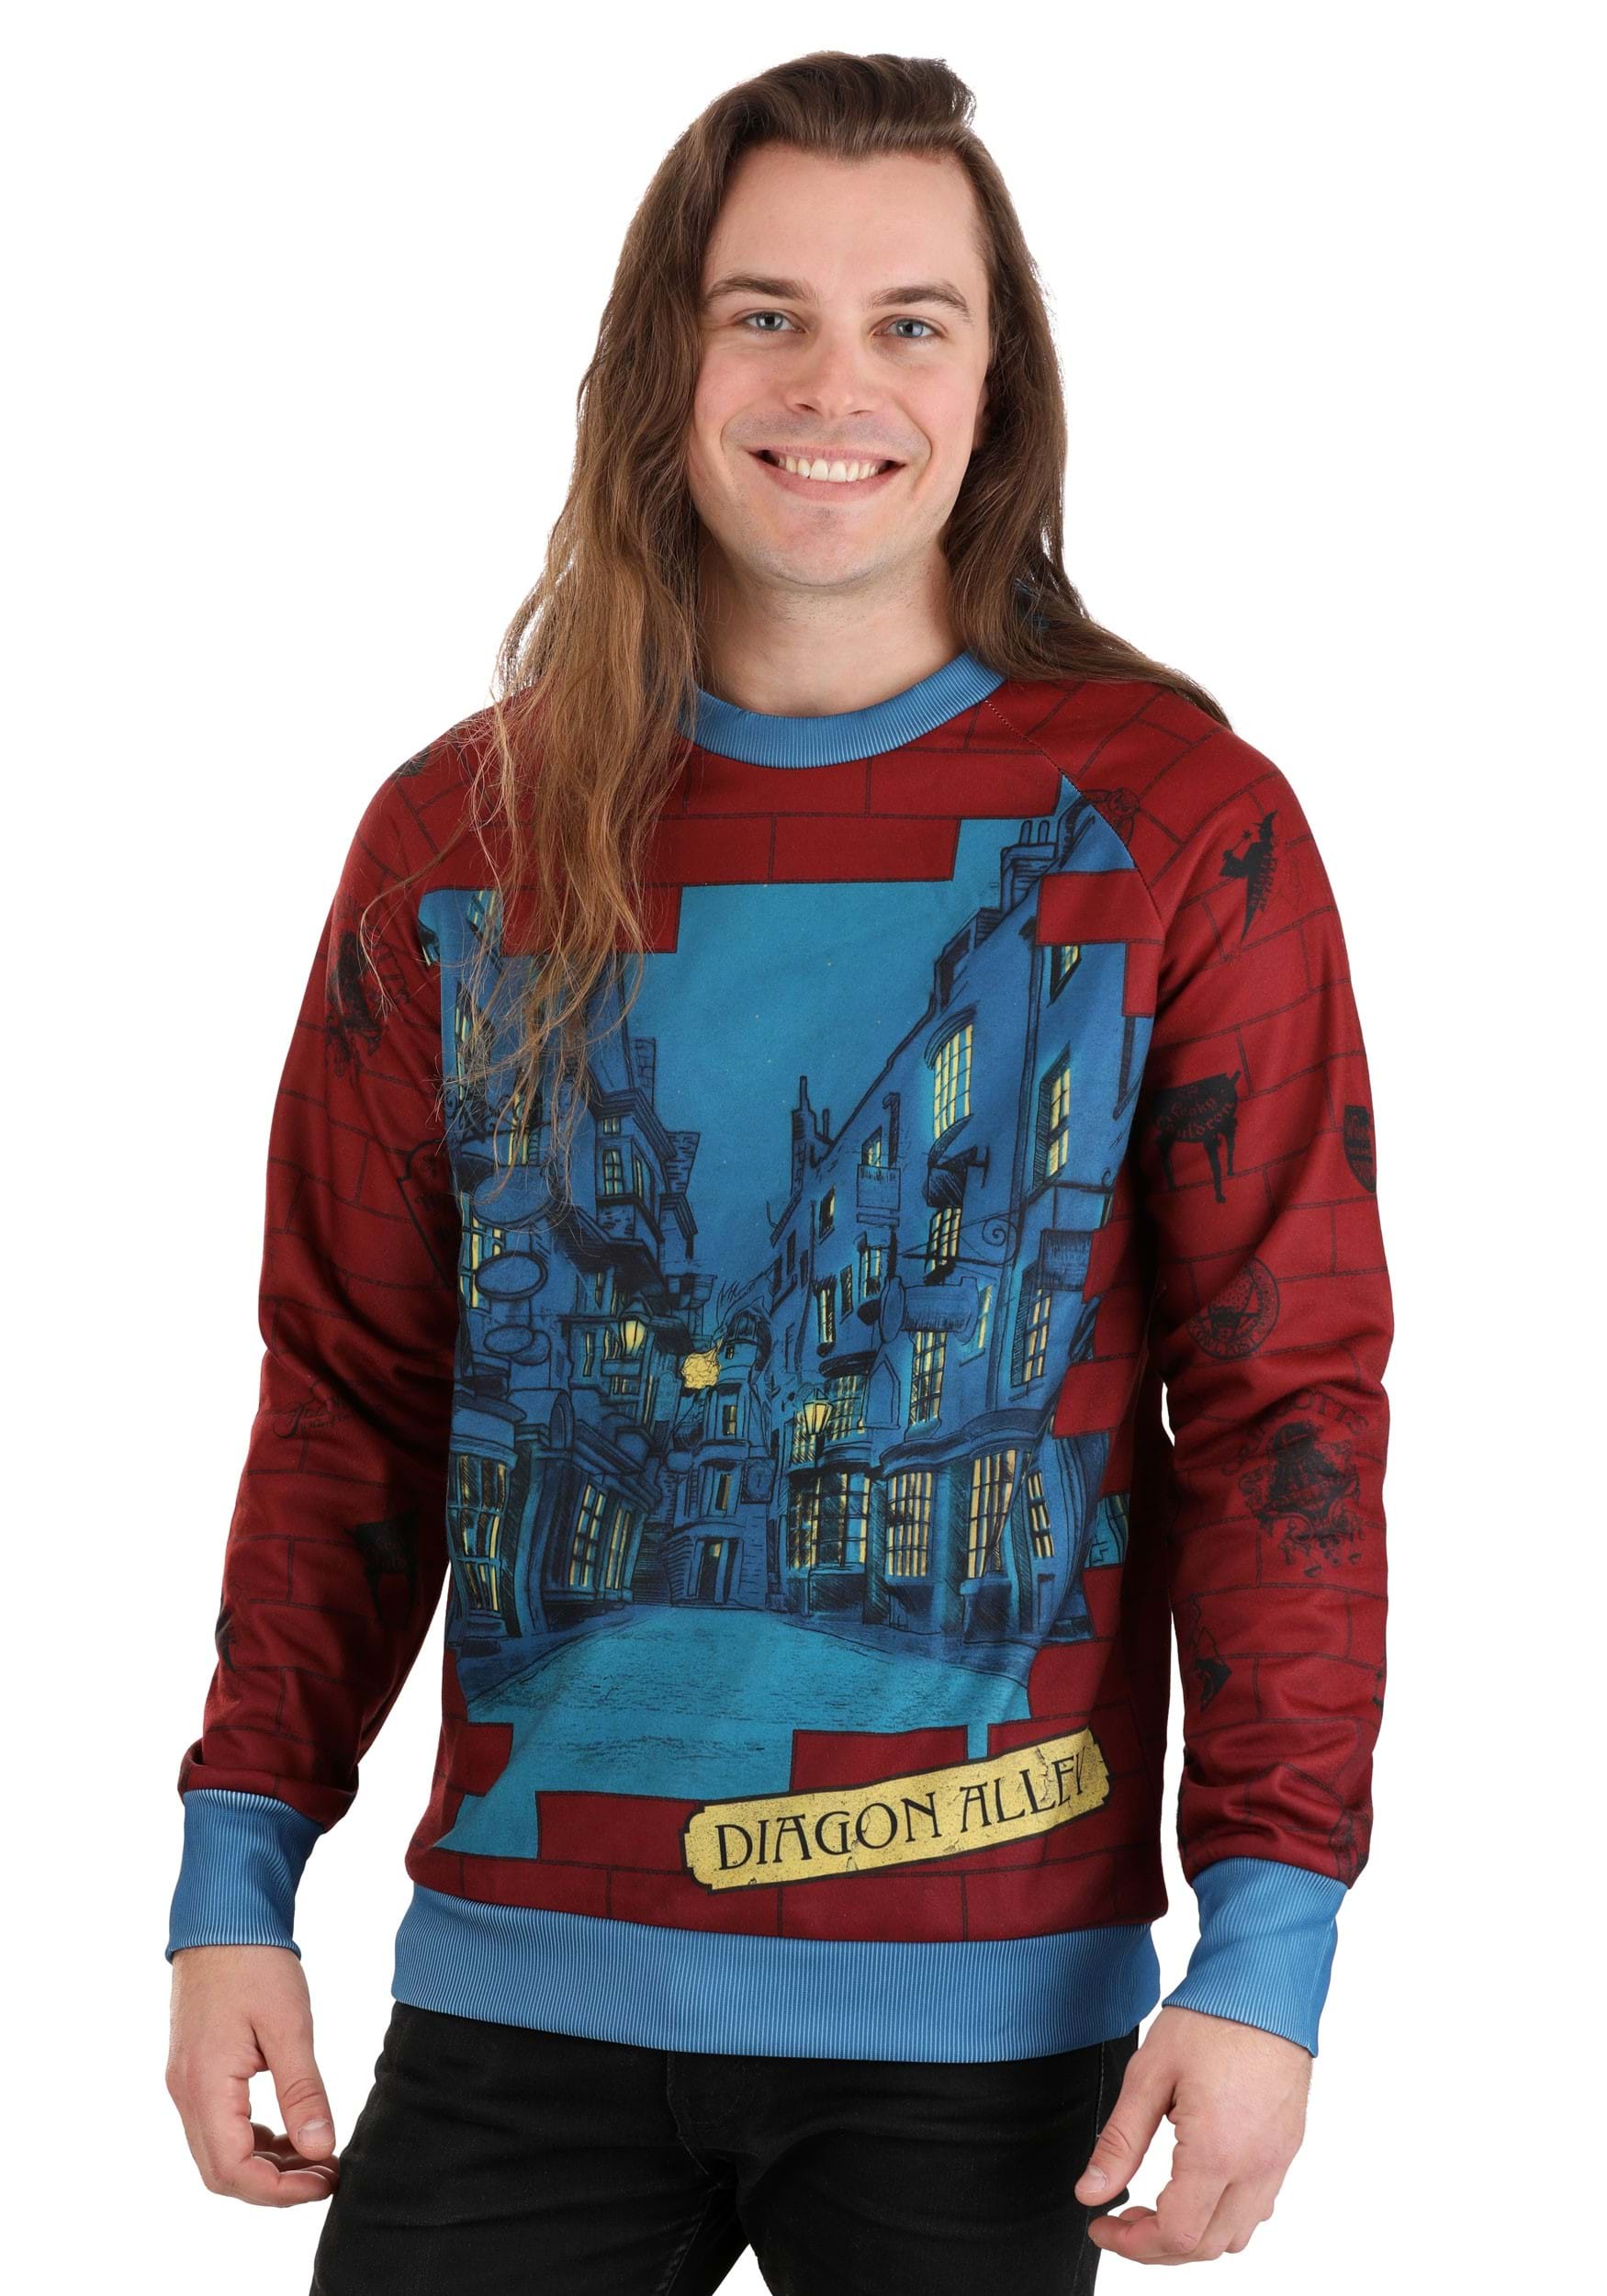 Photos - Fancy Dress Potter FUN Wear Diagon Alley Harry  Adult Sweater Red/Blue FUN4264AD 